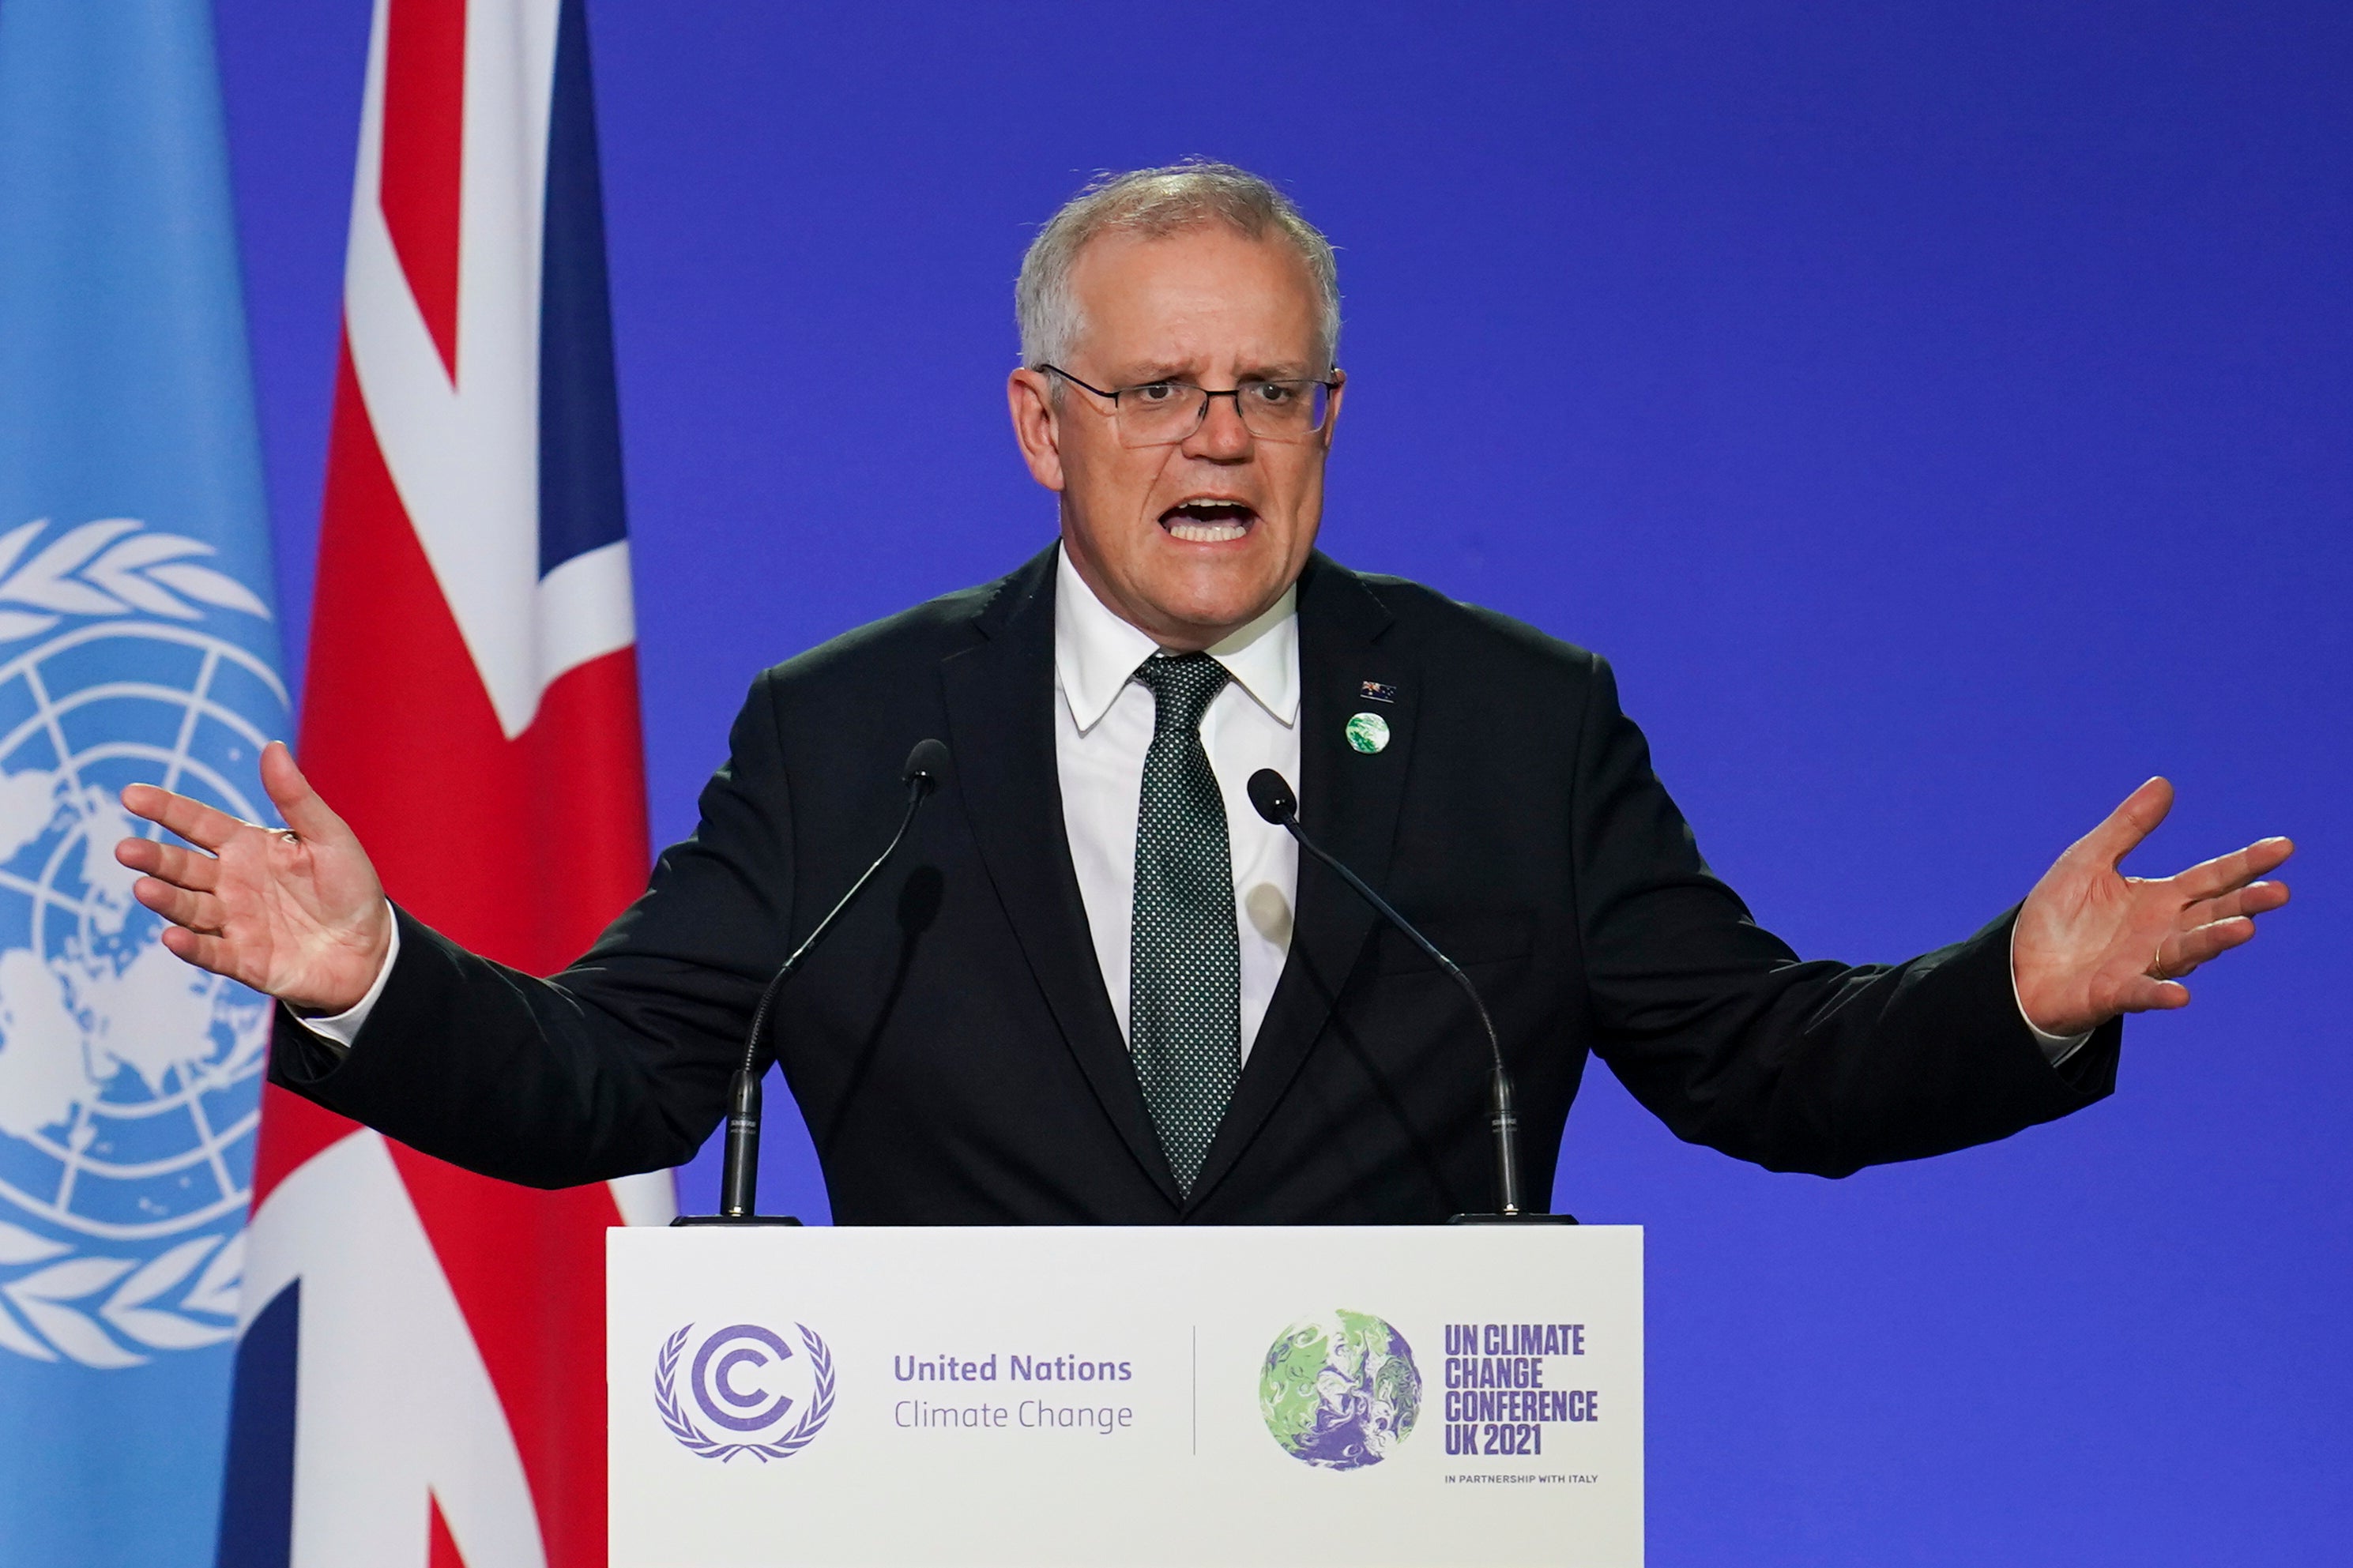 File: Australian prime minister Scott Morrison delivers an address during the COP26 Summit